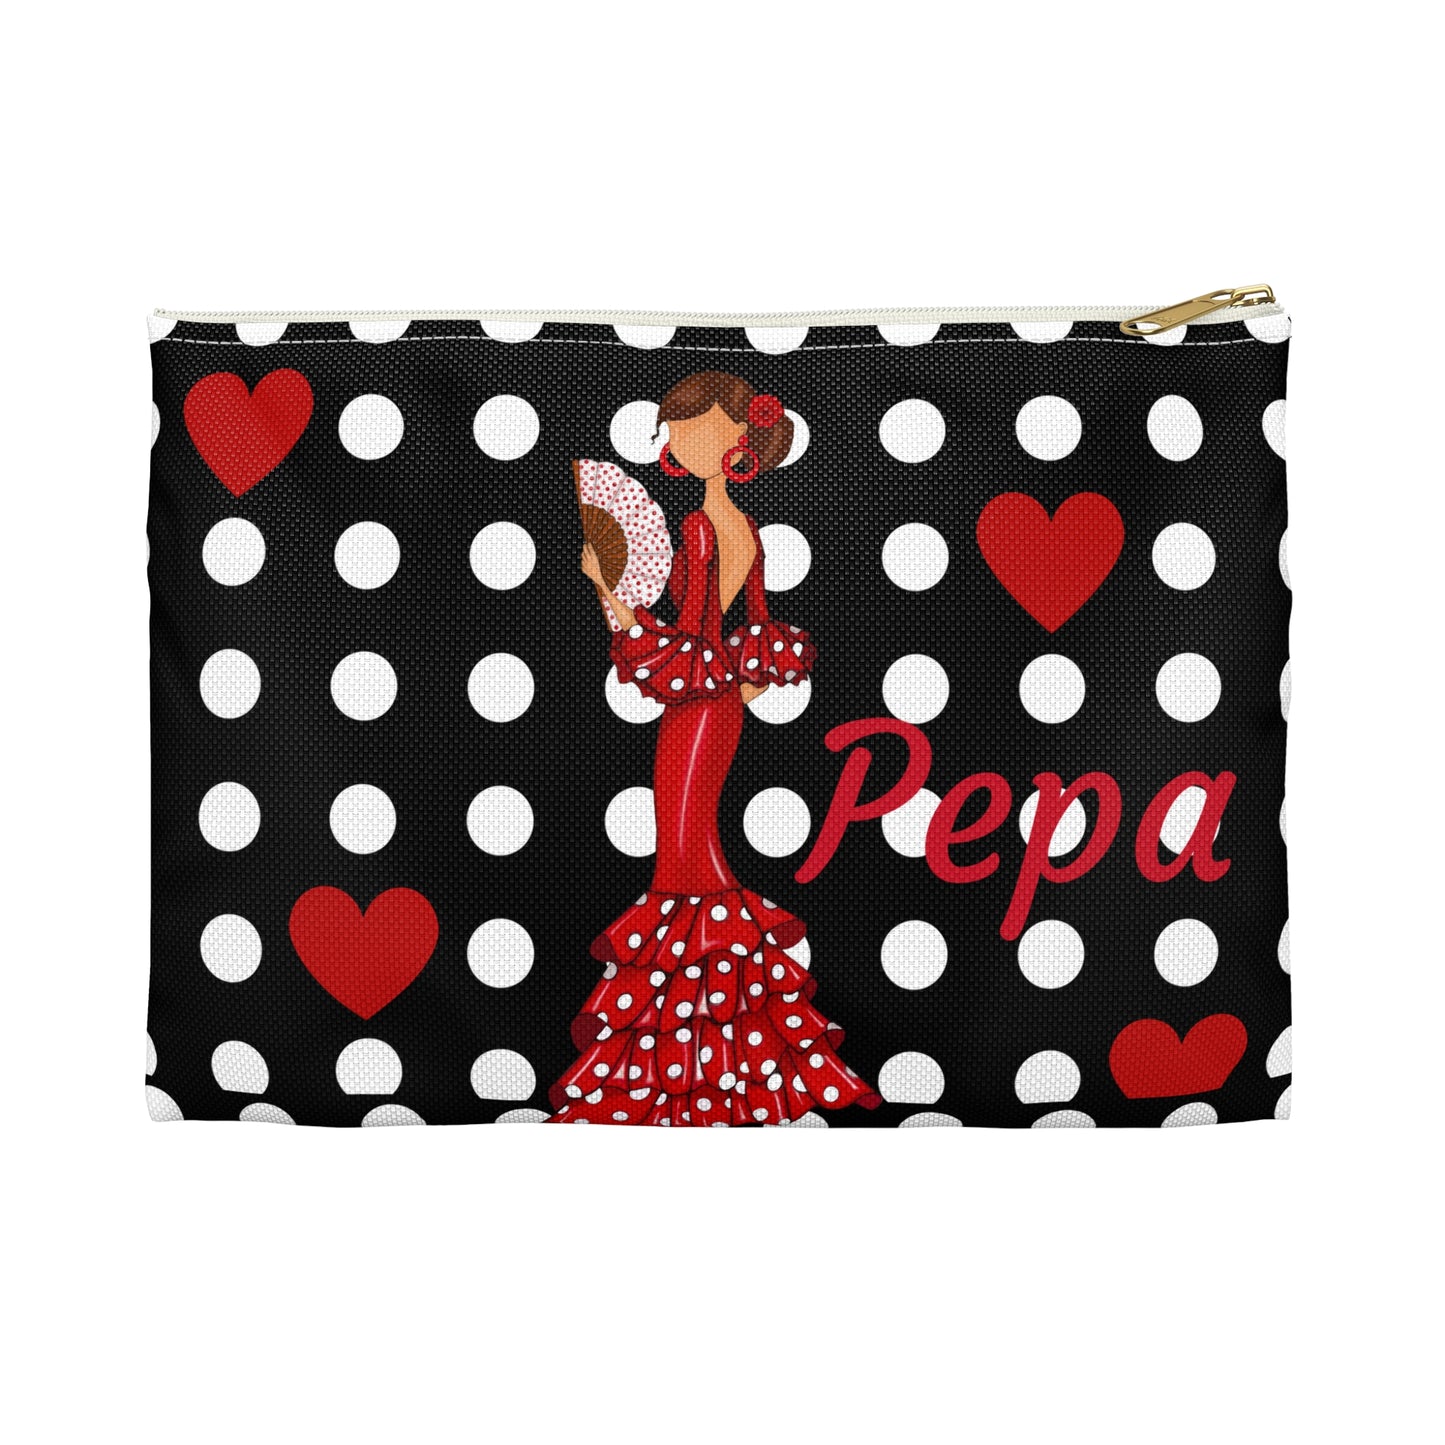 a black and white polka dot purse with a lady in a red dress